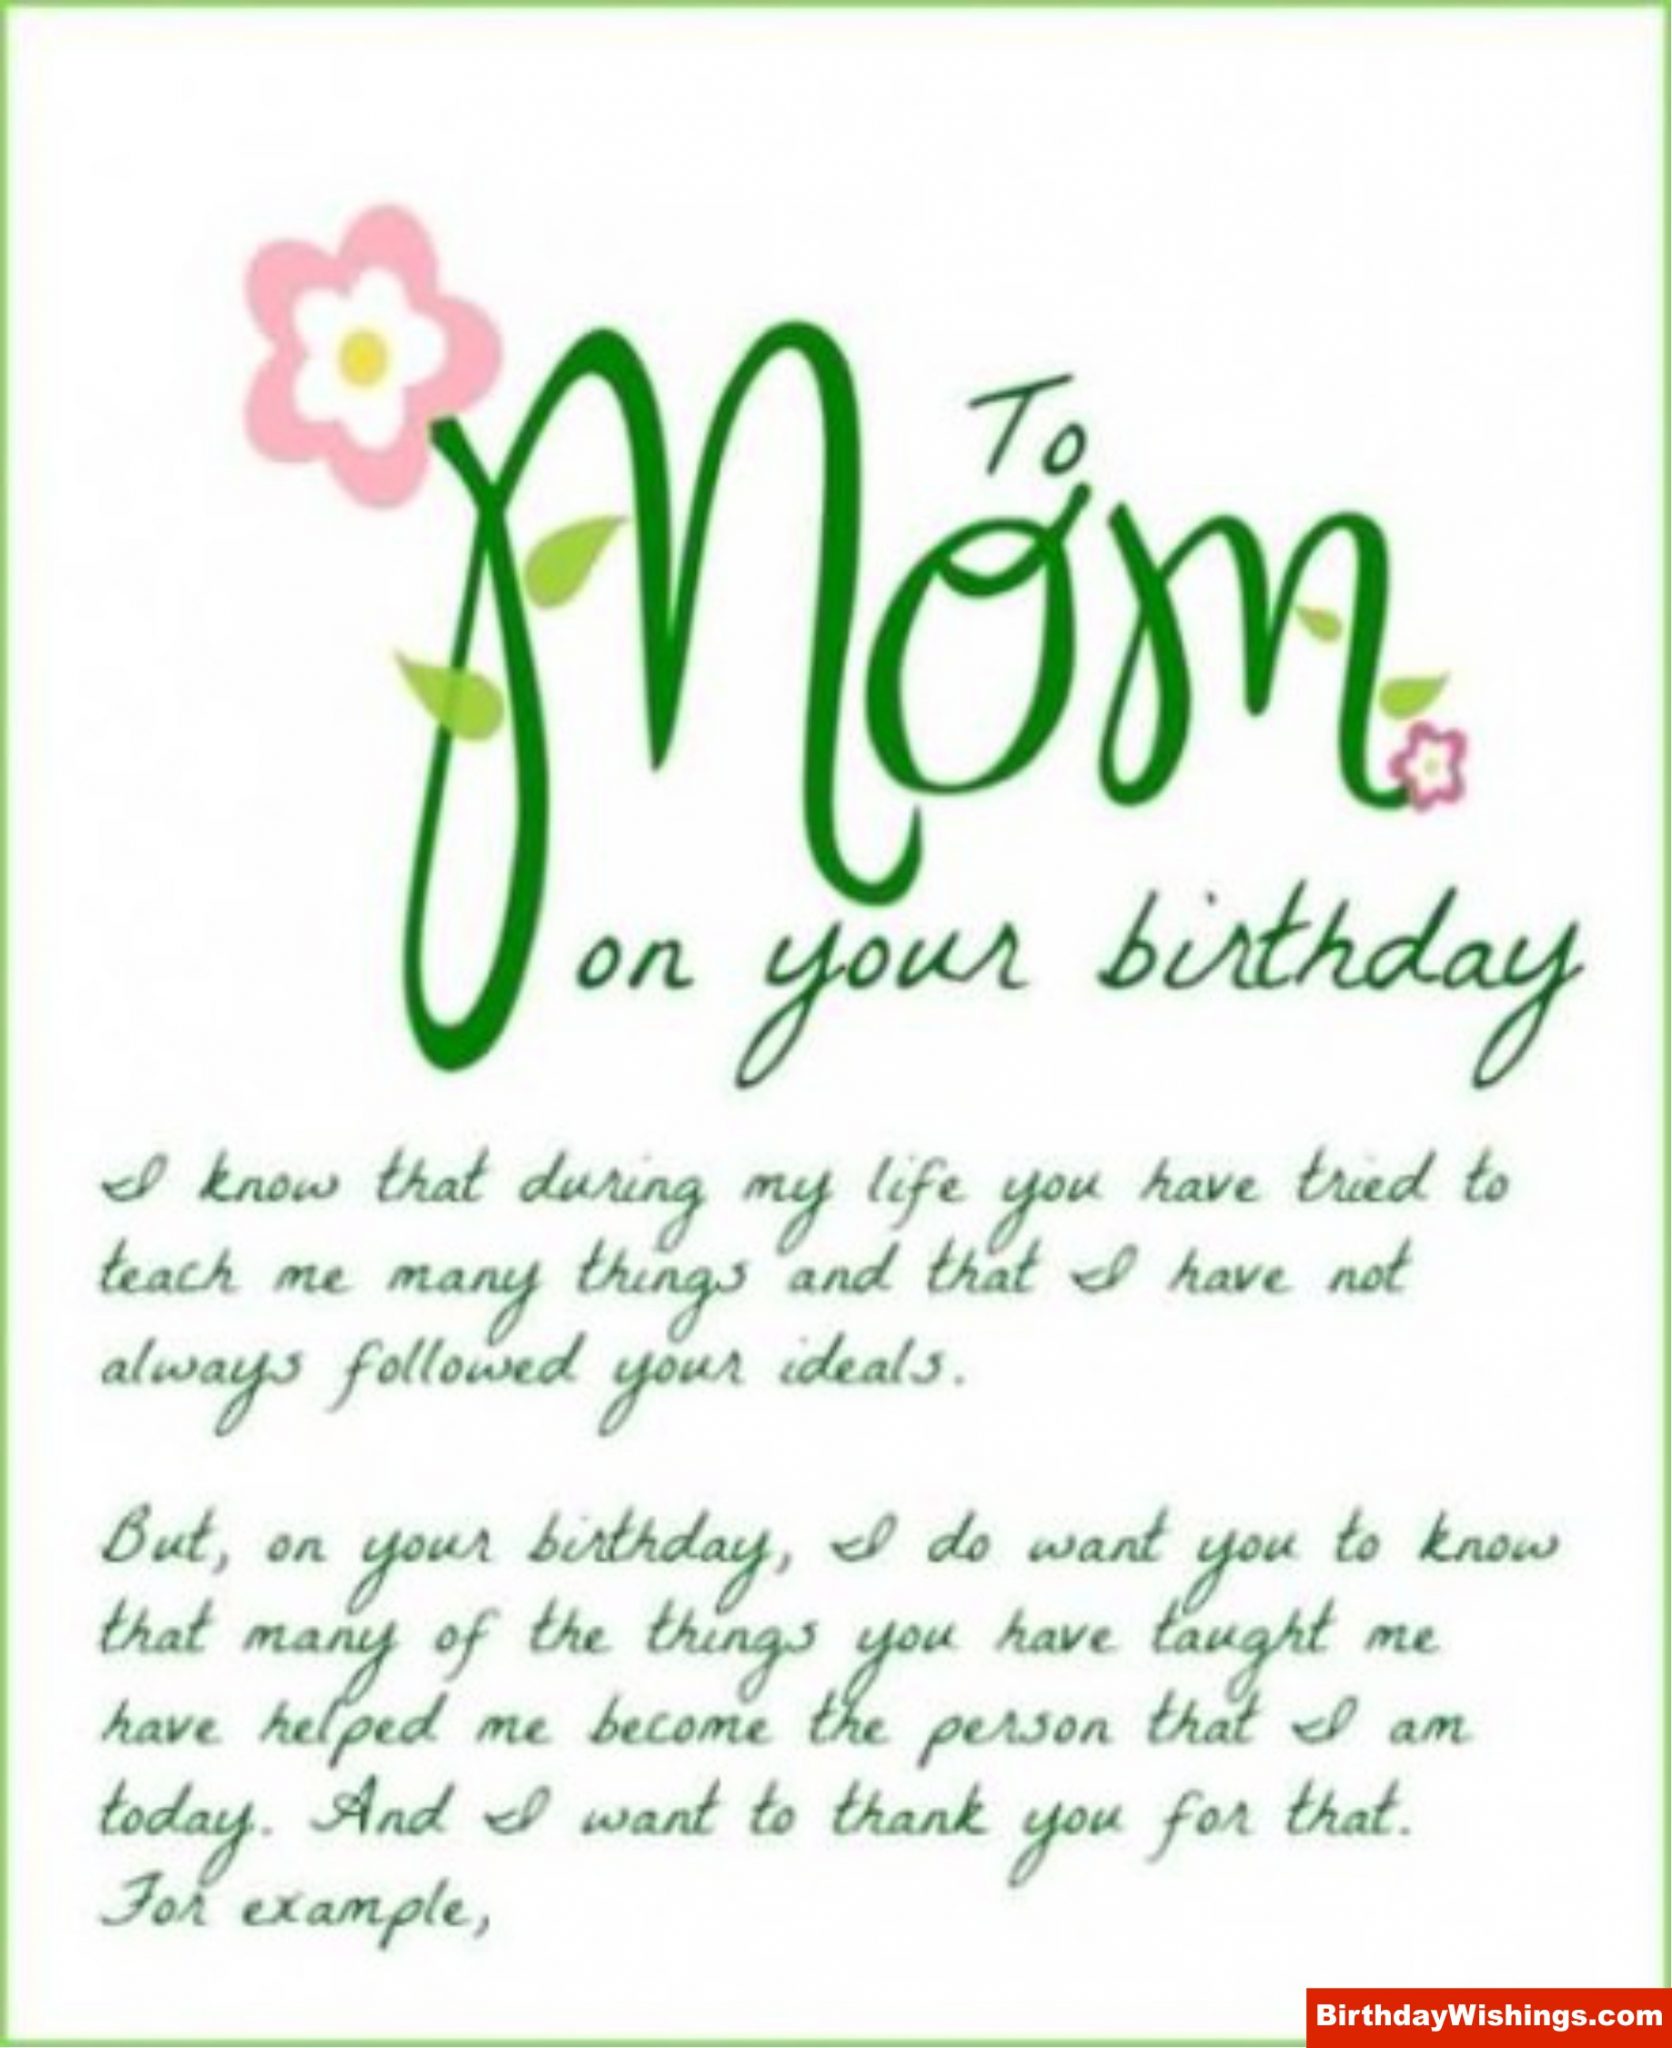 Homemade Birthday Card Ideas For Mom From Daughter